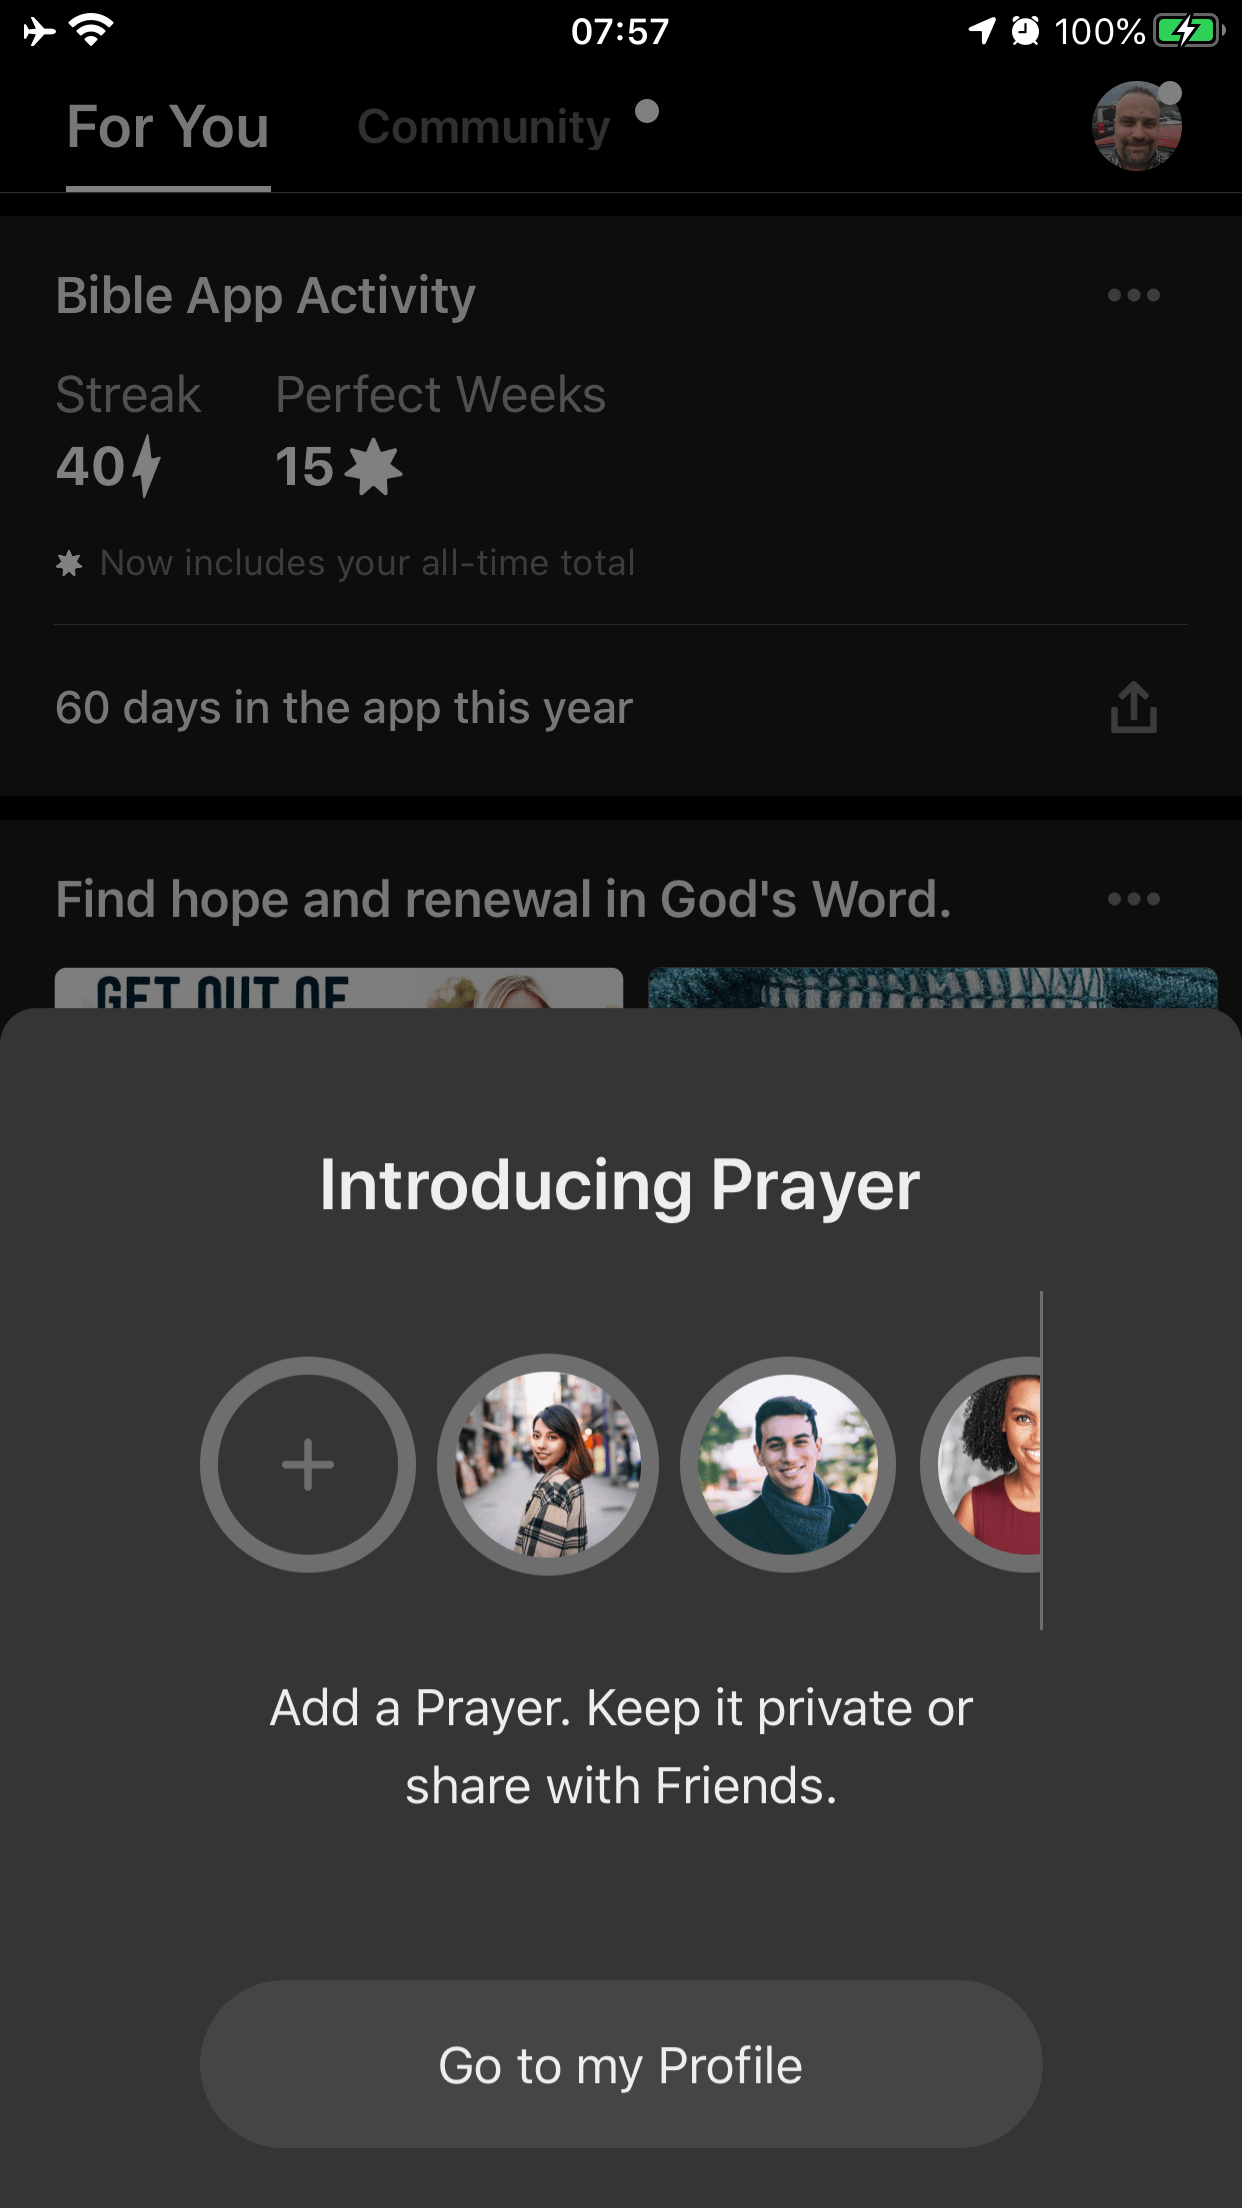 YouVersion Adds Prayer Feature To Their Bible App - YouVersion Community creates 1 million prayers during first week of new Bible App Prayer feature. #YouVersion #Prayer